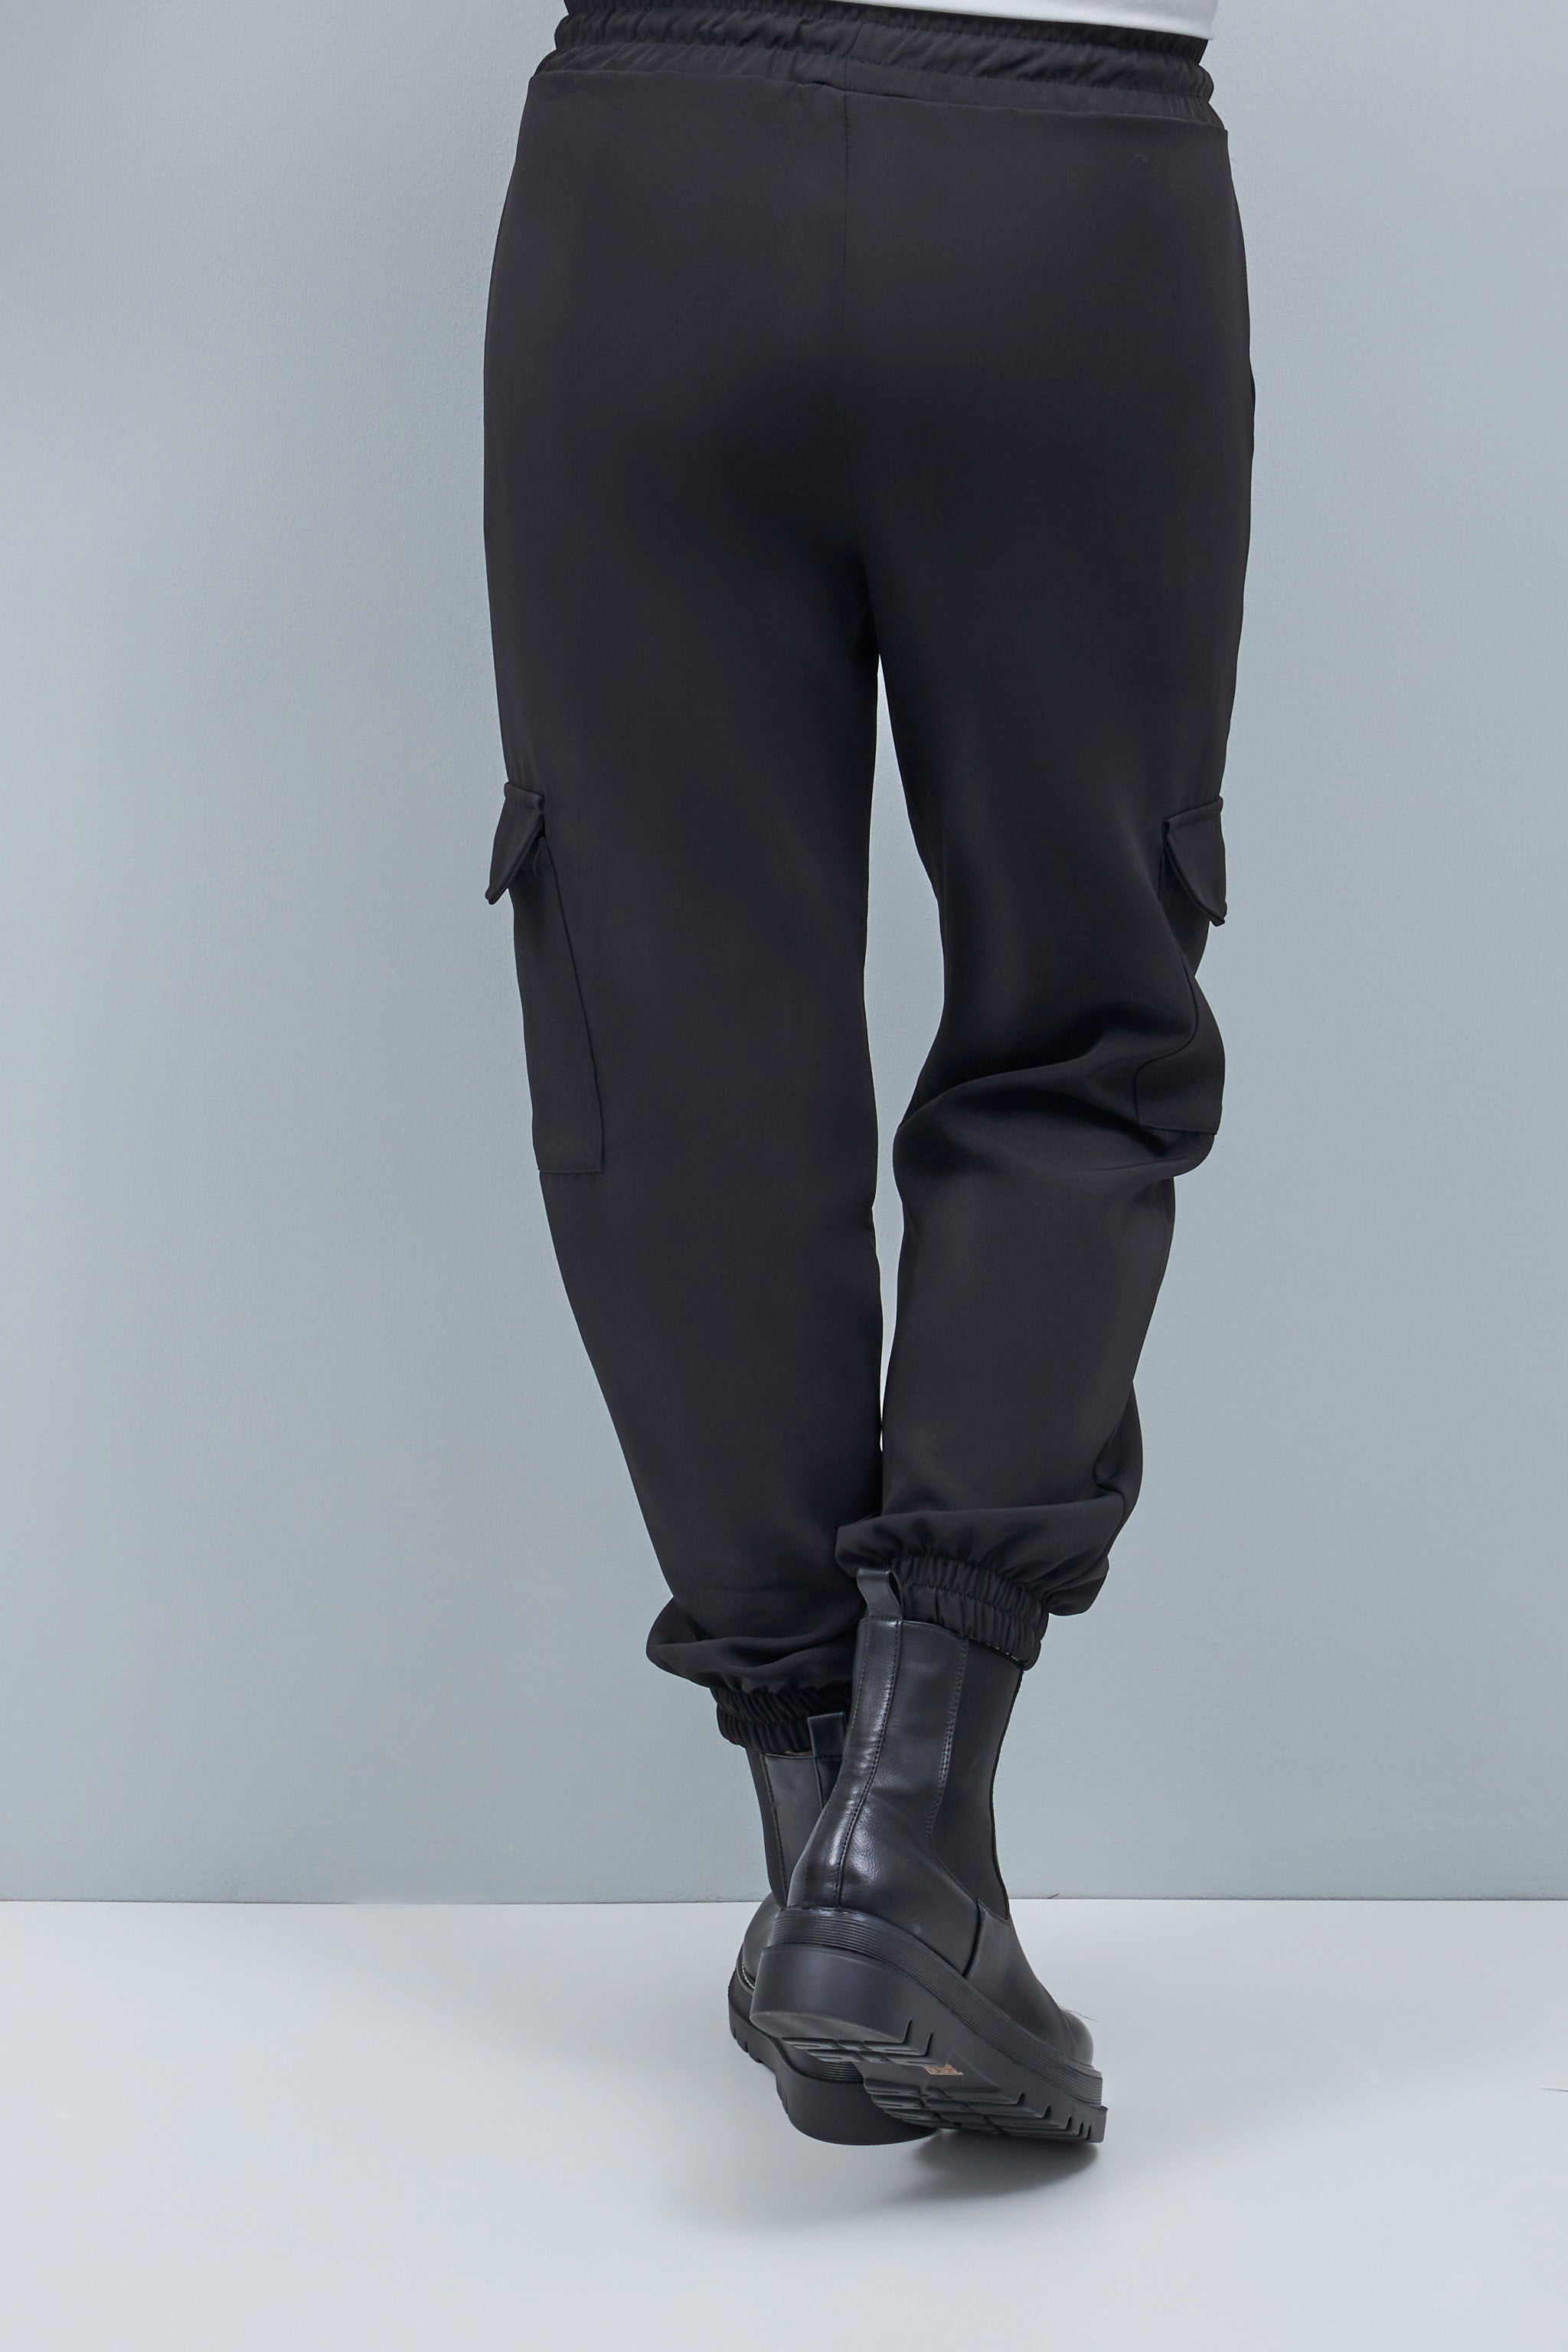 Pants with patch pockets and cuffs, black